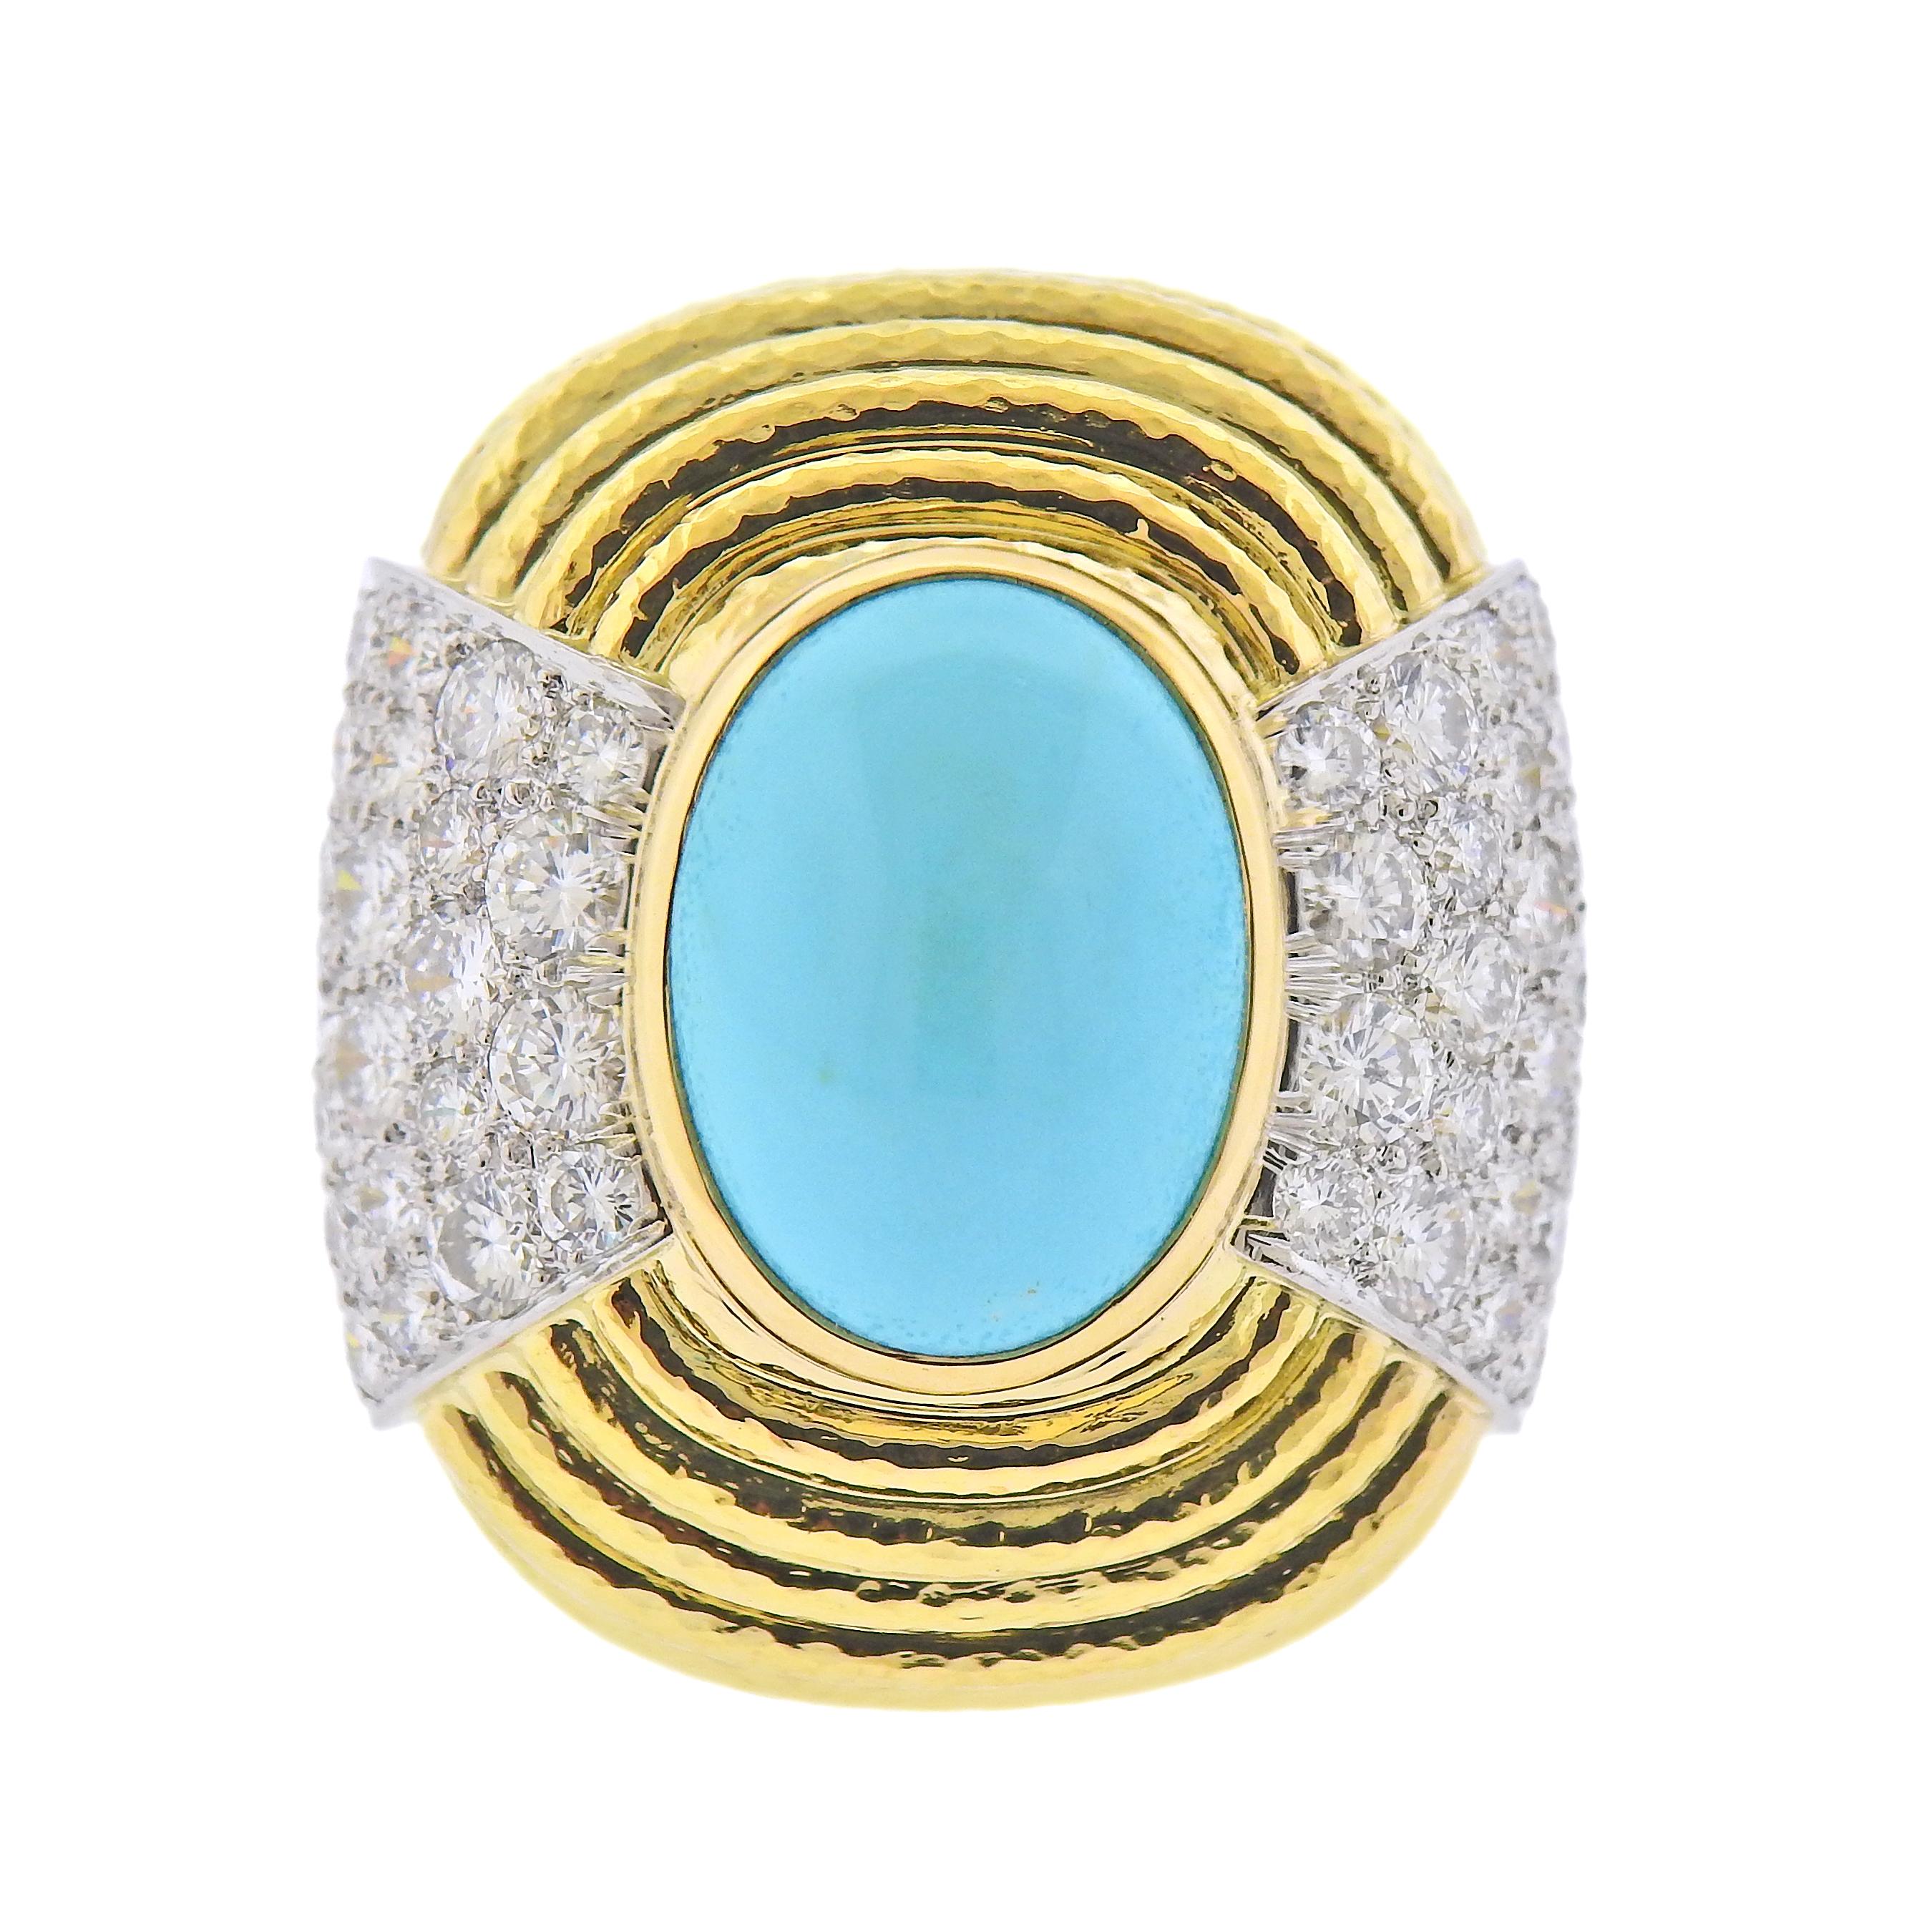 18k Yellow Gold & Platinum cocktail ring by David Webb. Set with a large turquoise center stone, surrounded by approx 2.00ctw in VS-SI/H diamonds. . 
Measurements - size 6 3/4, turquoise measures 16mm x 12mm. Marked - David Webb, 18k, 900PT. Weight